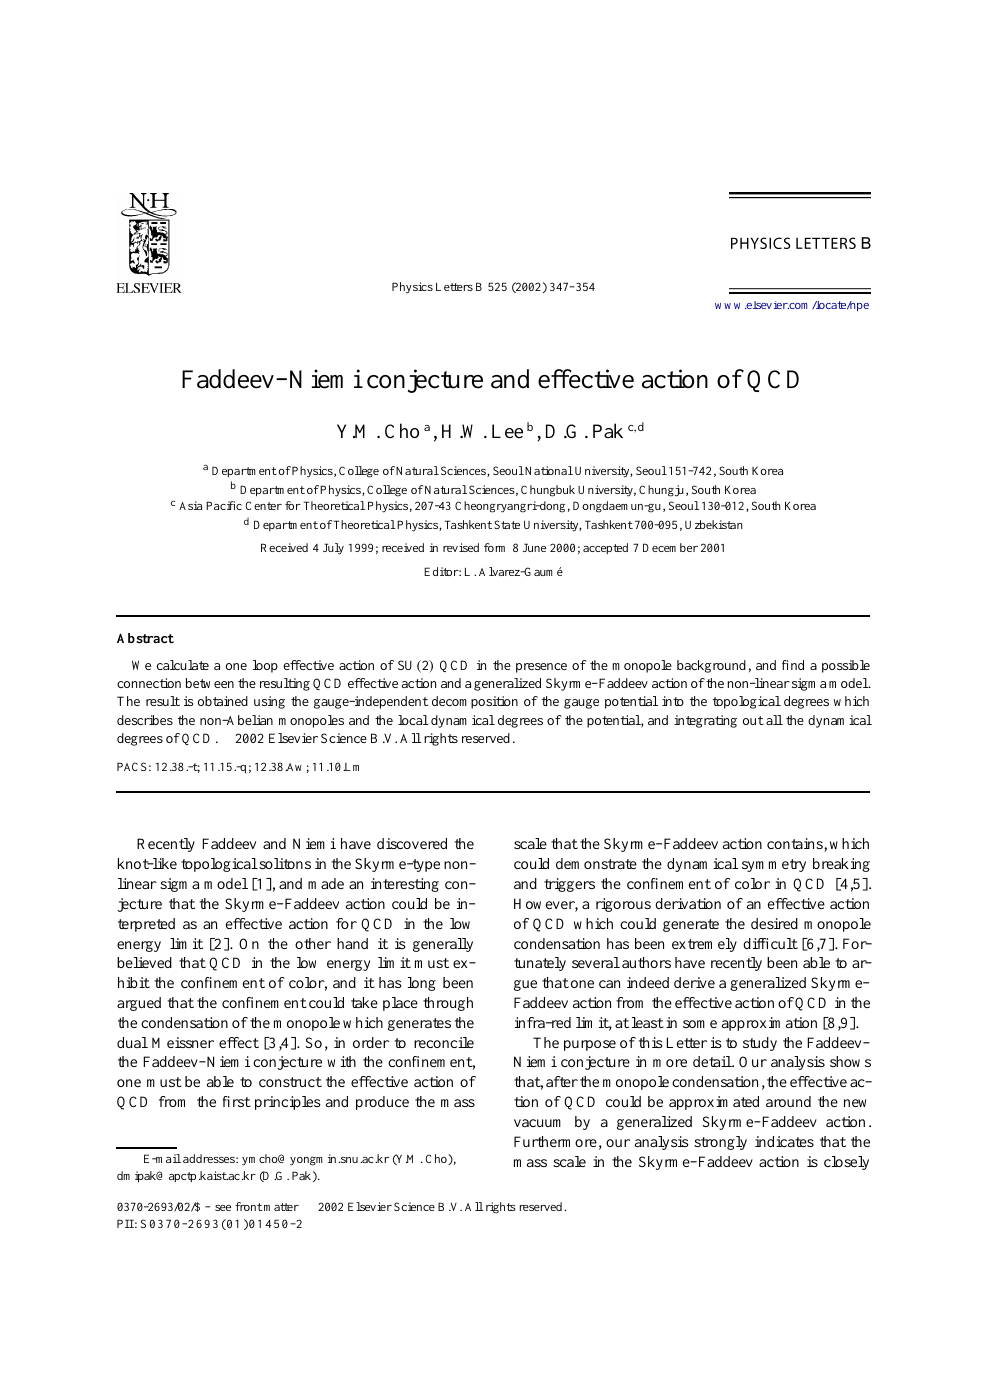 Faddeev Niemi Conjecture And Effective Action Of Qcd Topic Of Research Paper In Physical Sciences Download Scholarly Article Pdf And Read For Free On Cyberleninka Open Science Hub